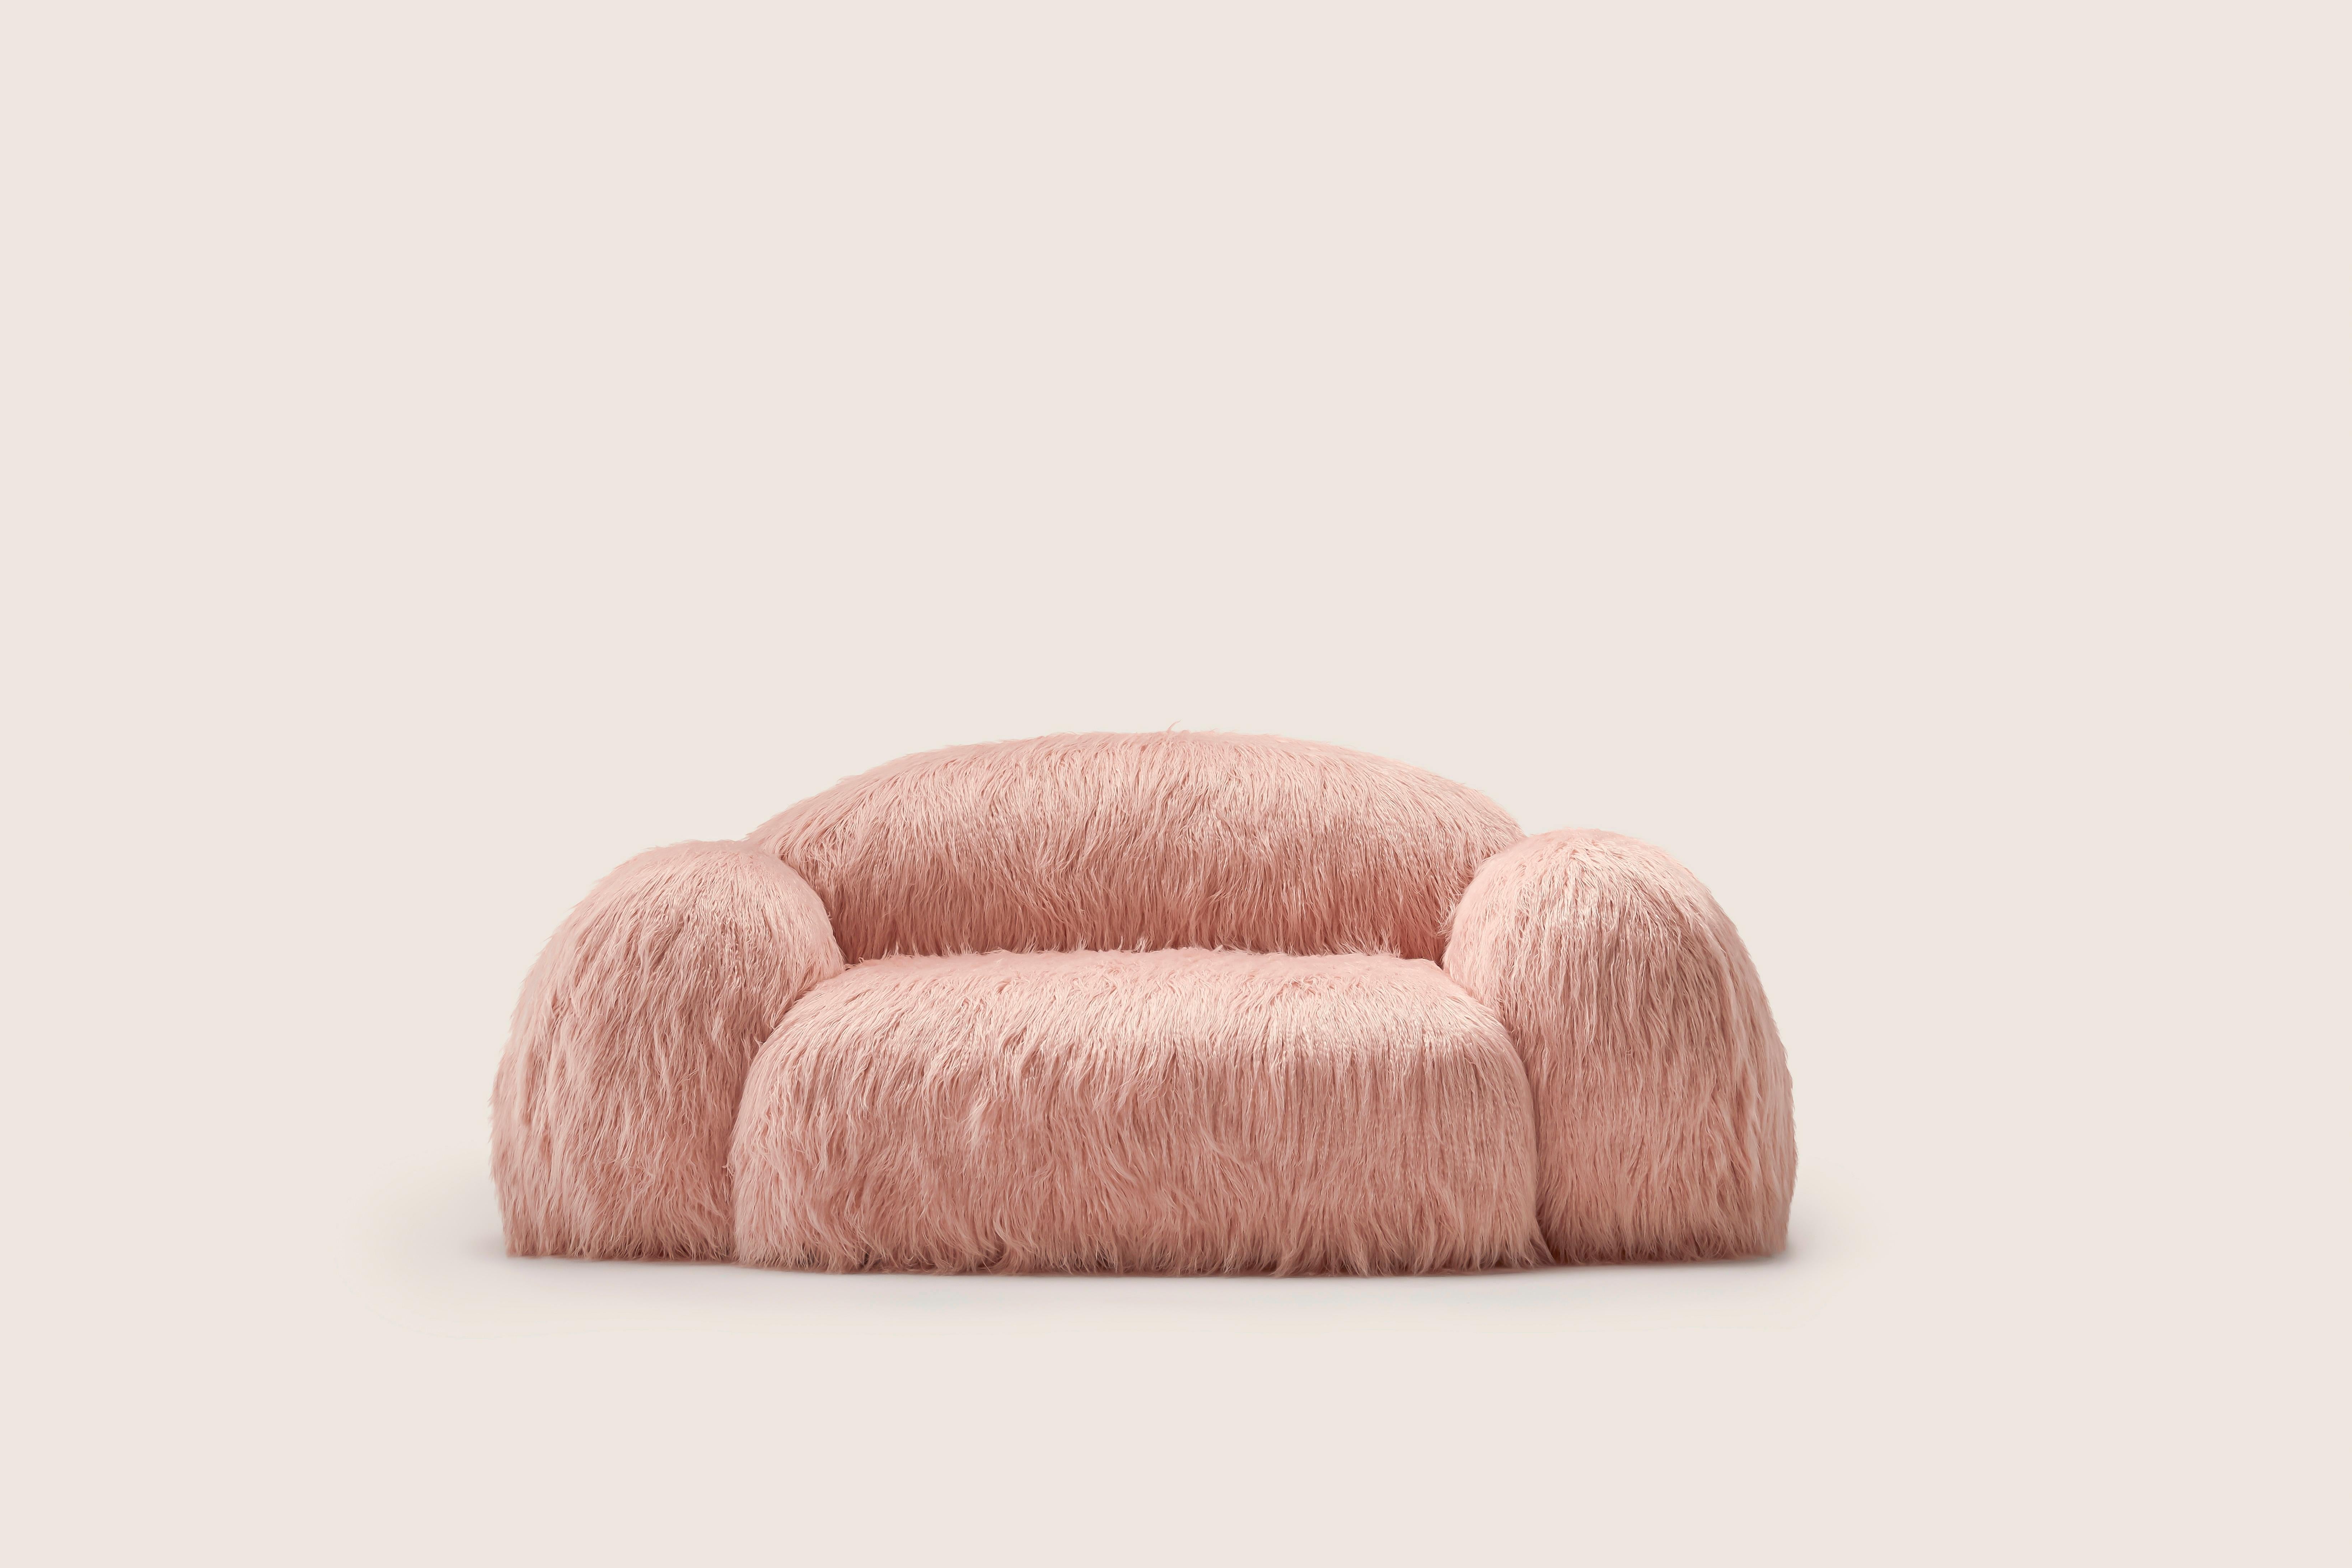 Yeti sofa by Vladimir Naumov
Dimensions: W 202 x D 110 x H 82 cm
Materials: Mongolia fur, pine wood structure, plywood and tablex, foam cmhr (high resilence and flame retardant) sculpted beech wooden legs
Also available in pink, beige, black and